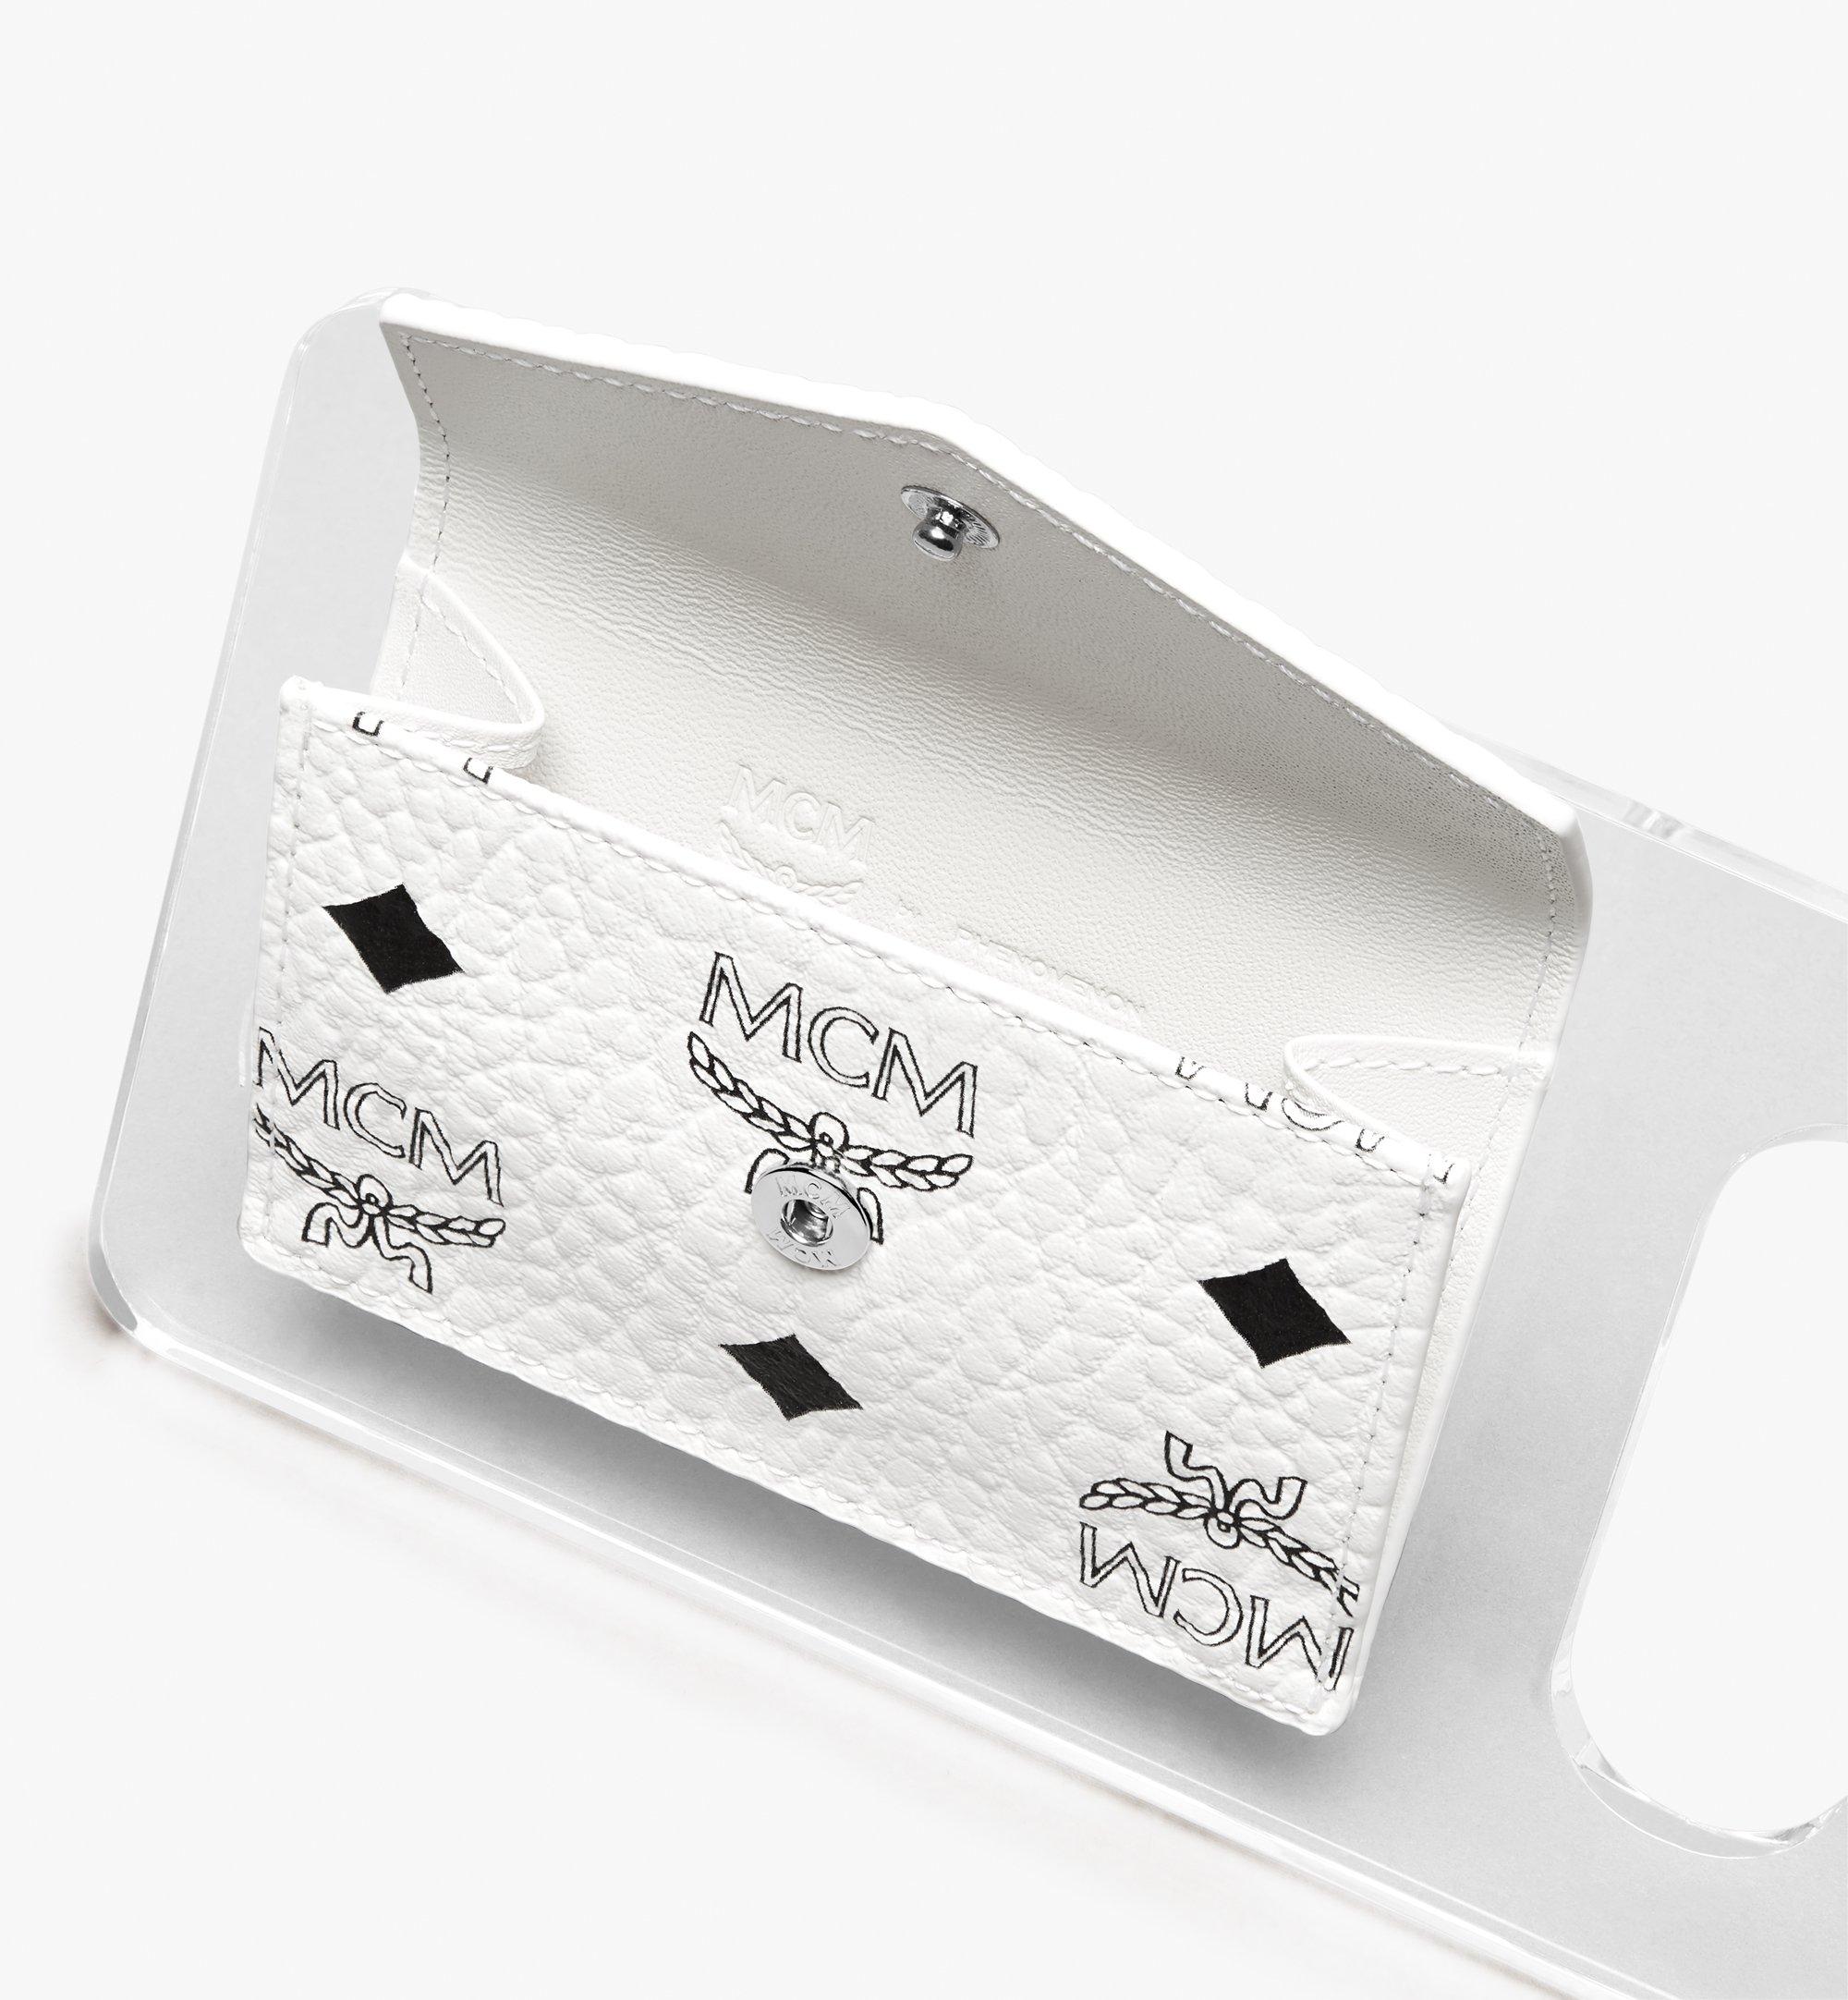 MCM MCM by PHENOMENON Acrylic Disk Coin Pouch in Visetos White MYAASJP02WT001 Alternate View 1